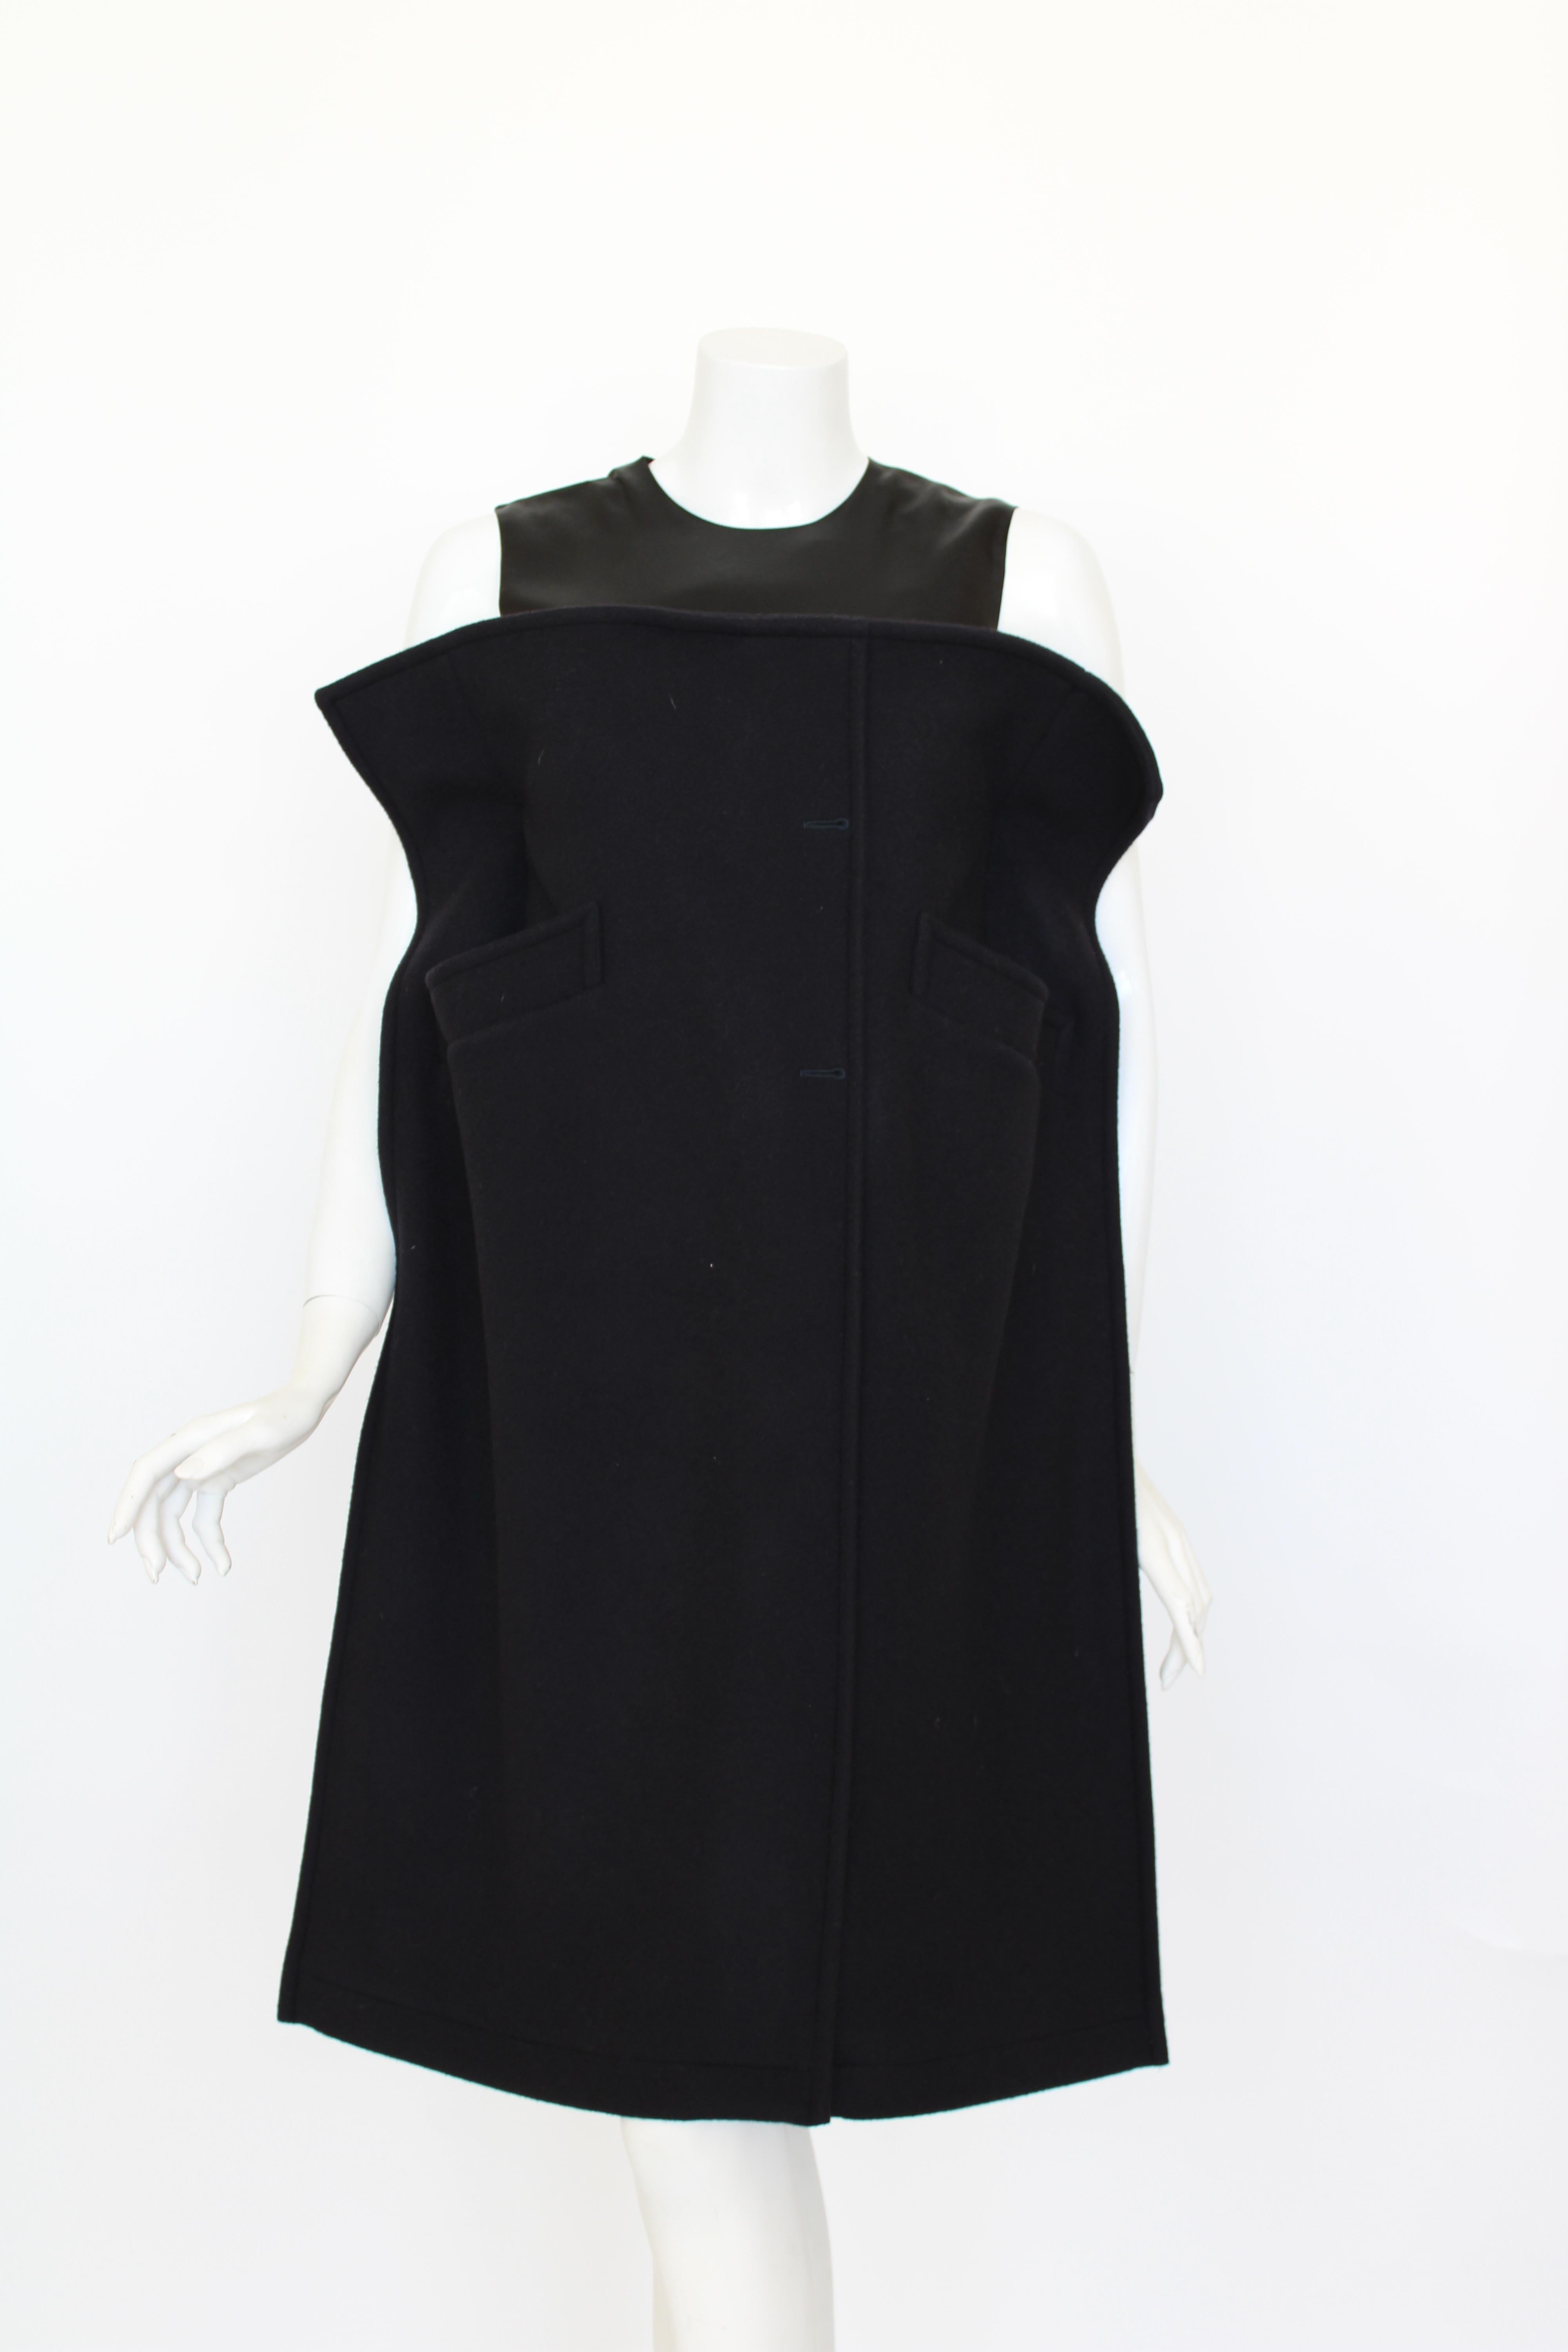 This silk and wool dress is reconstructed from a mans coat, with a silk upper and wool architectural lower half with coat pockets button holes.